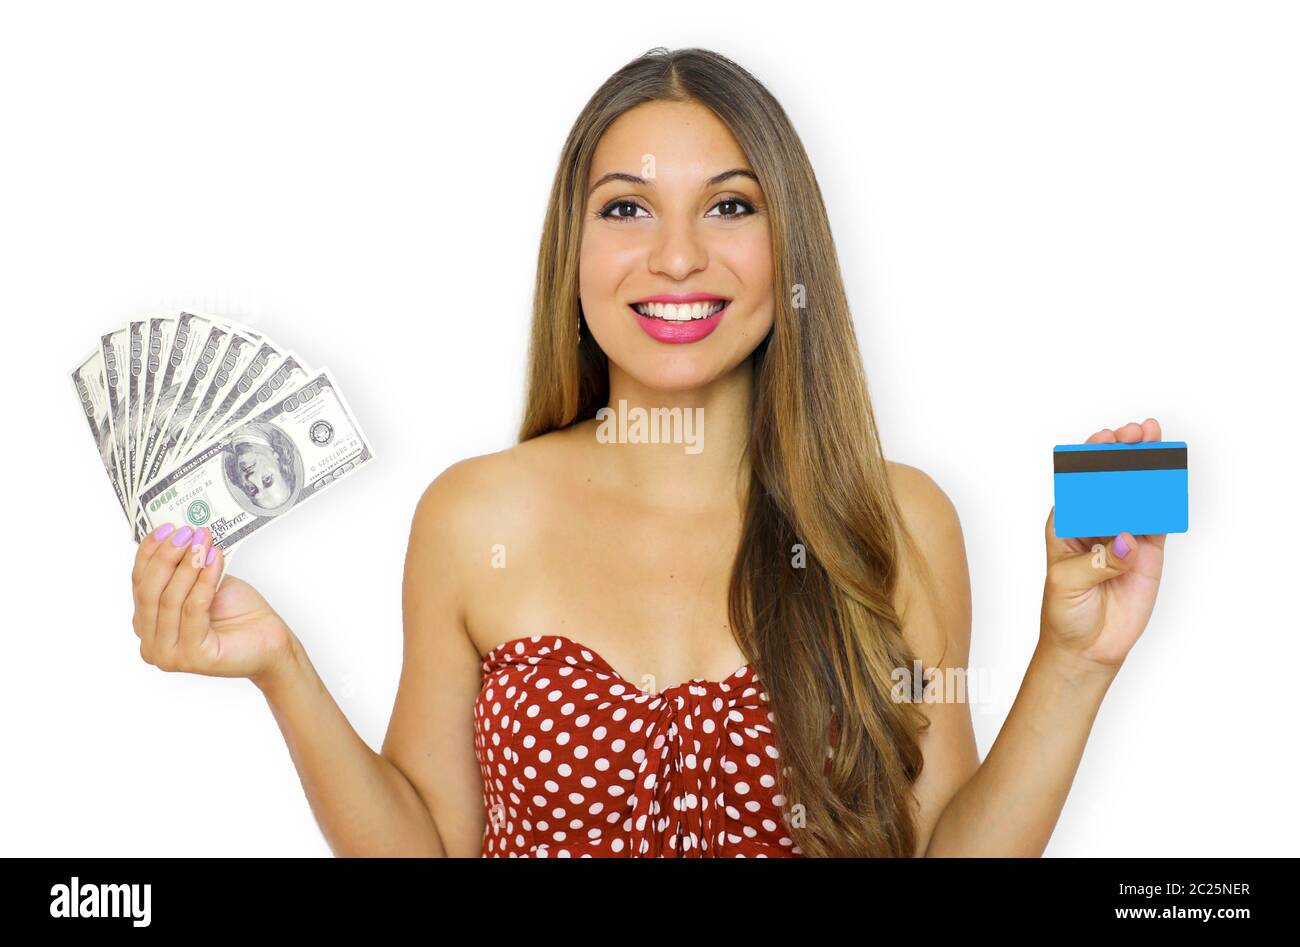 Portrait of a smiling young woman showing bunch of money banknotes and holding plastic credit card isolated over white background. Stock Photo